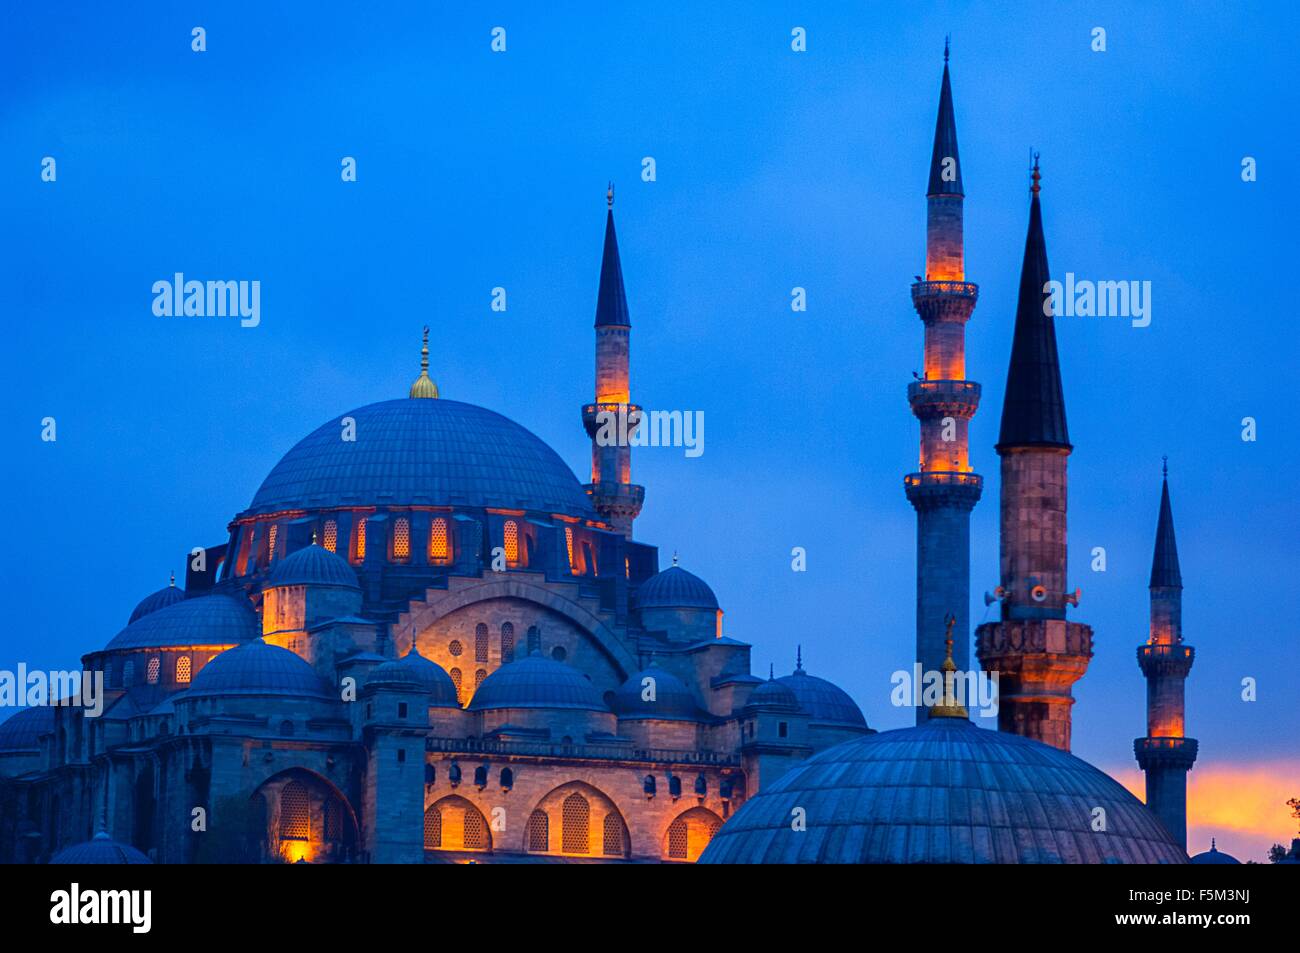 Rooftop detail of Blue Mosque Istanbul, Sultan Ahmed Mosque at night, Turkey Stock Photo